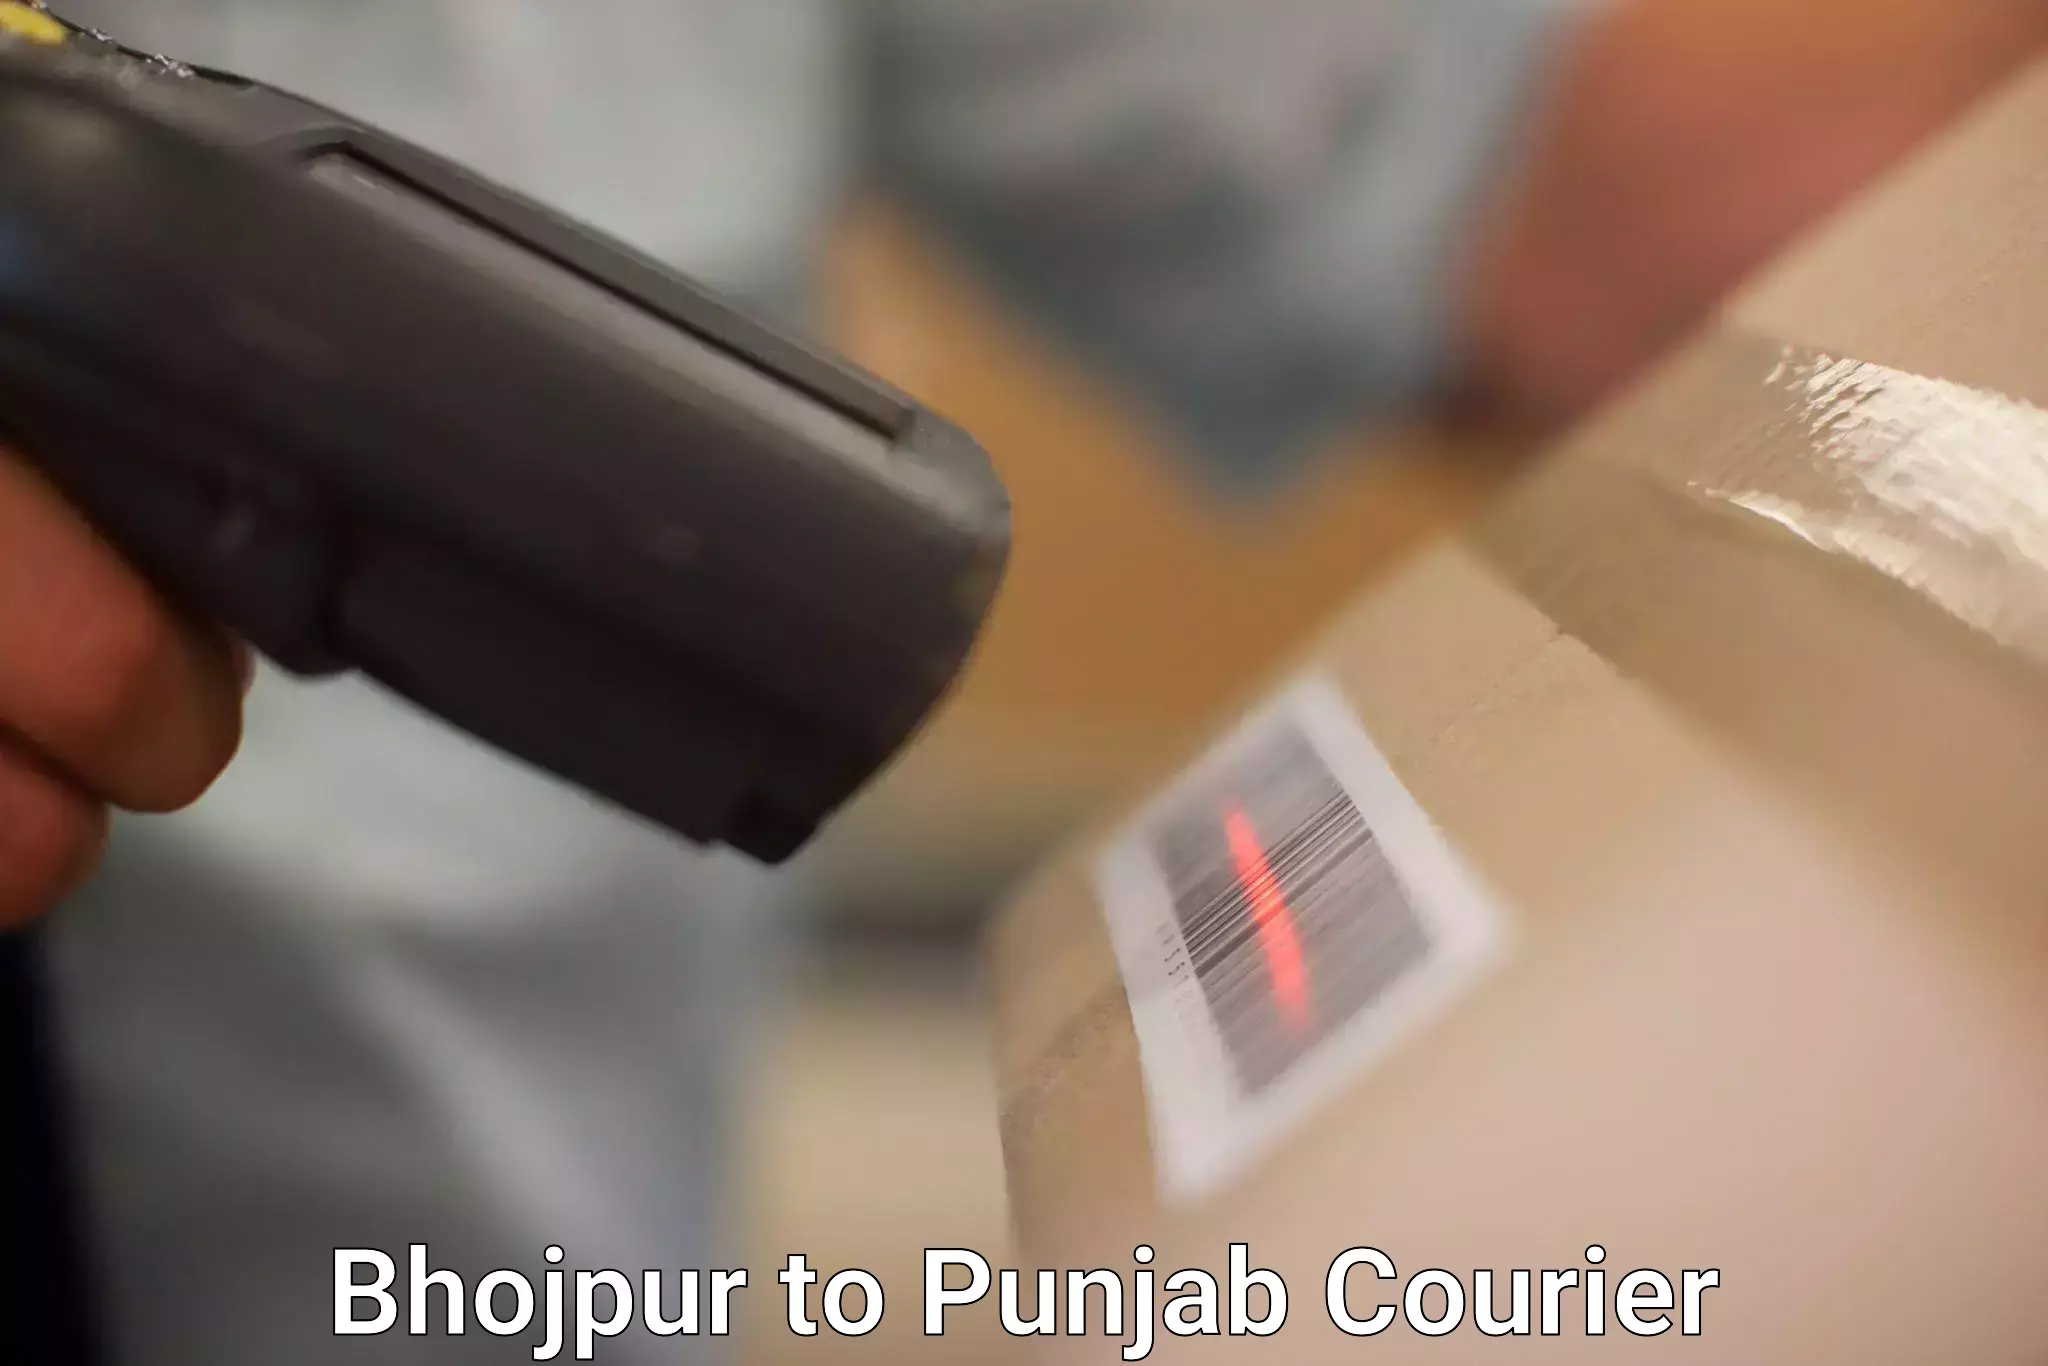 Courier service partnerships Bhojpur to Zirakpur